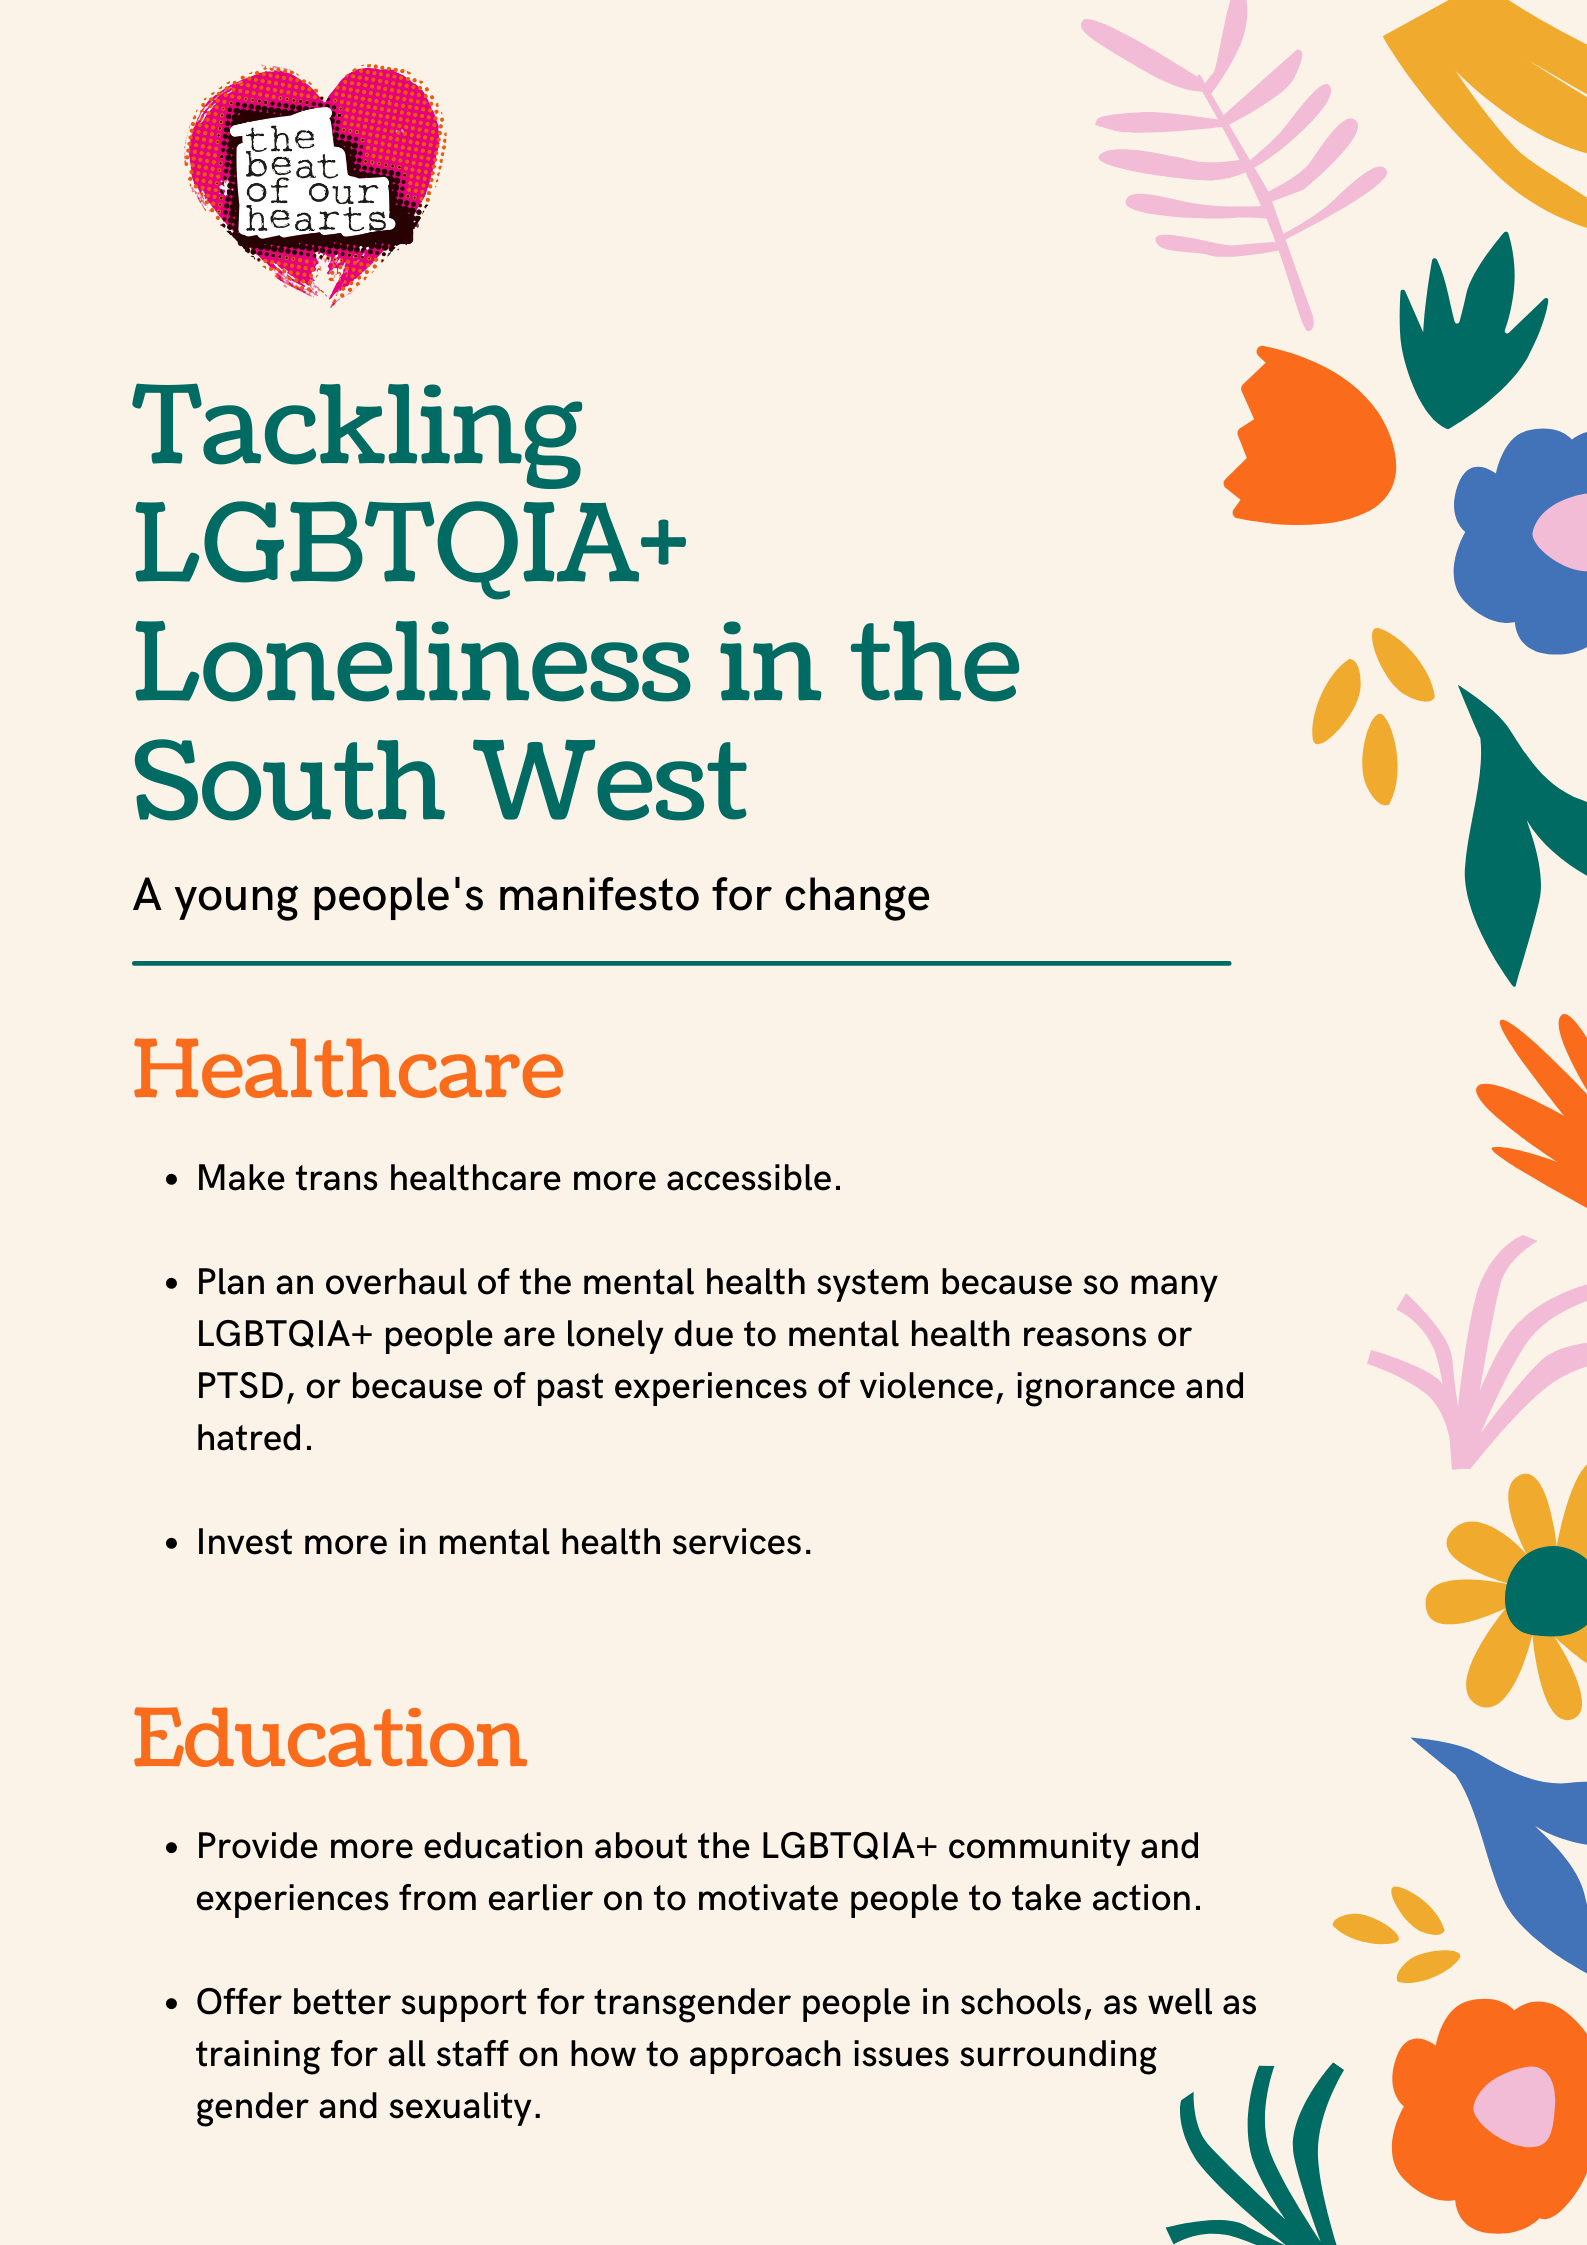 Picture of the manifesto, with a peach background and block colour flowers down the left-hand side. The Beat of Our Hearts logo is in the top left-hand corner. The manifesto is in two pages. The first page deals with healthcare and education.